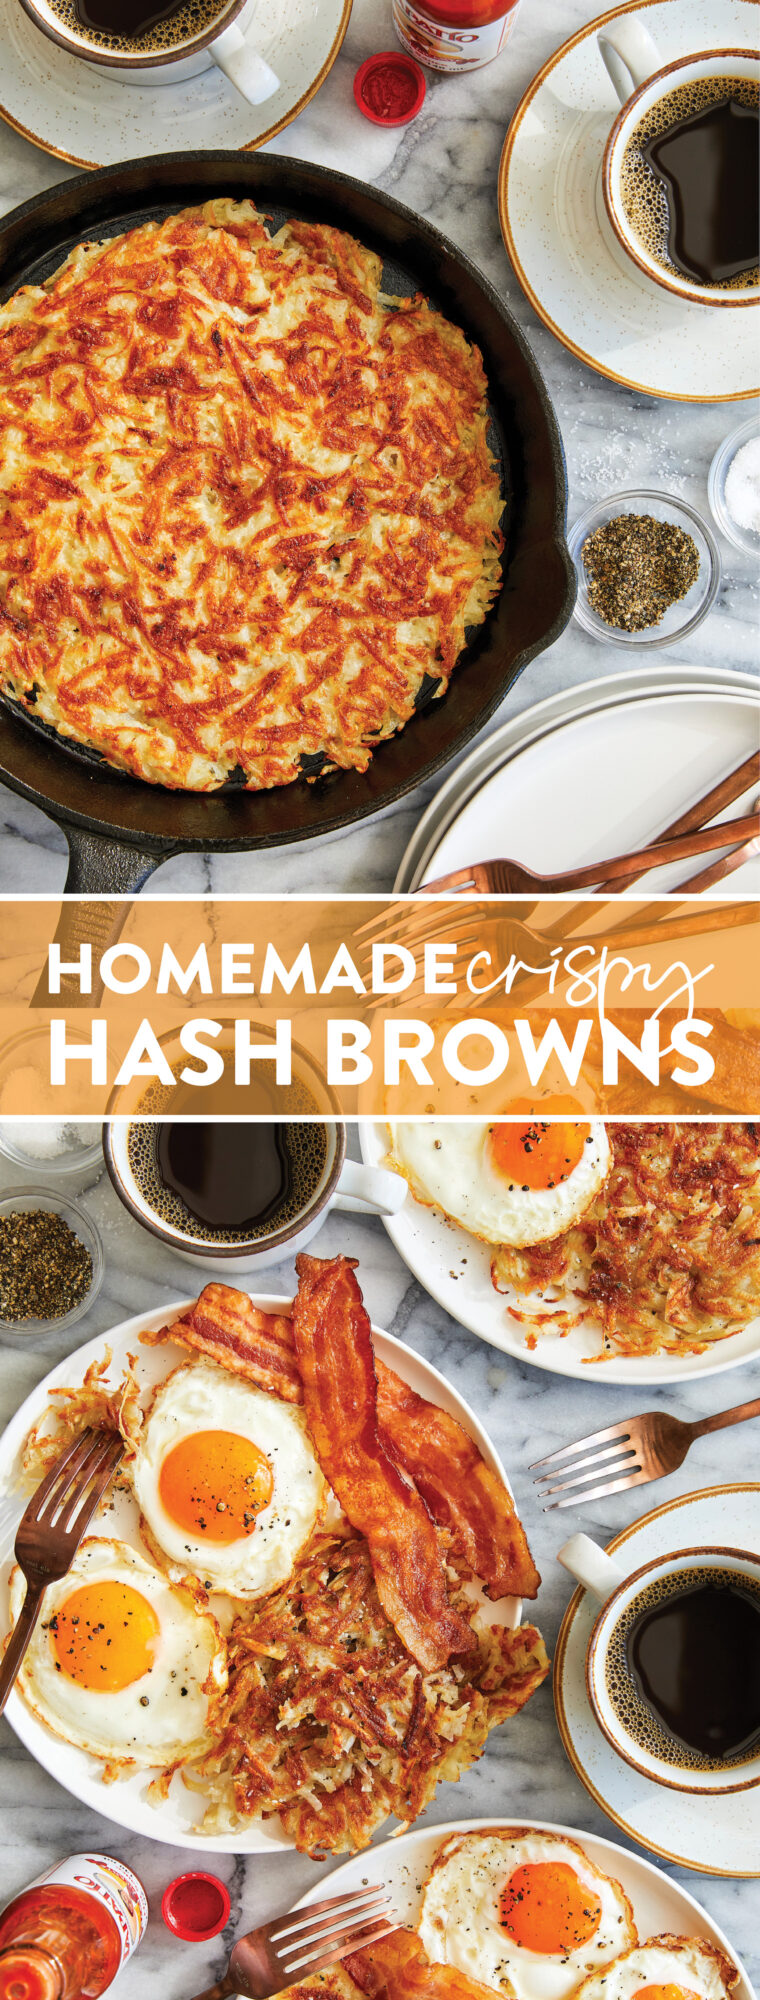 Homemade Crispy Hash Browns - Quick, easy and SO INCREDIBLY CRISPY! Comes out perfect every single time. Serve with ketchup and hot sauce!